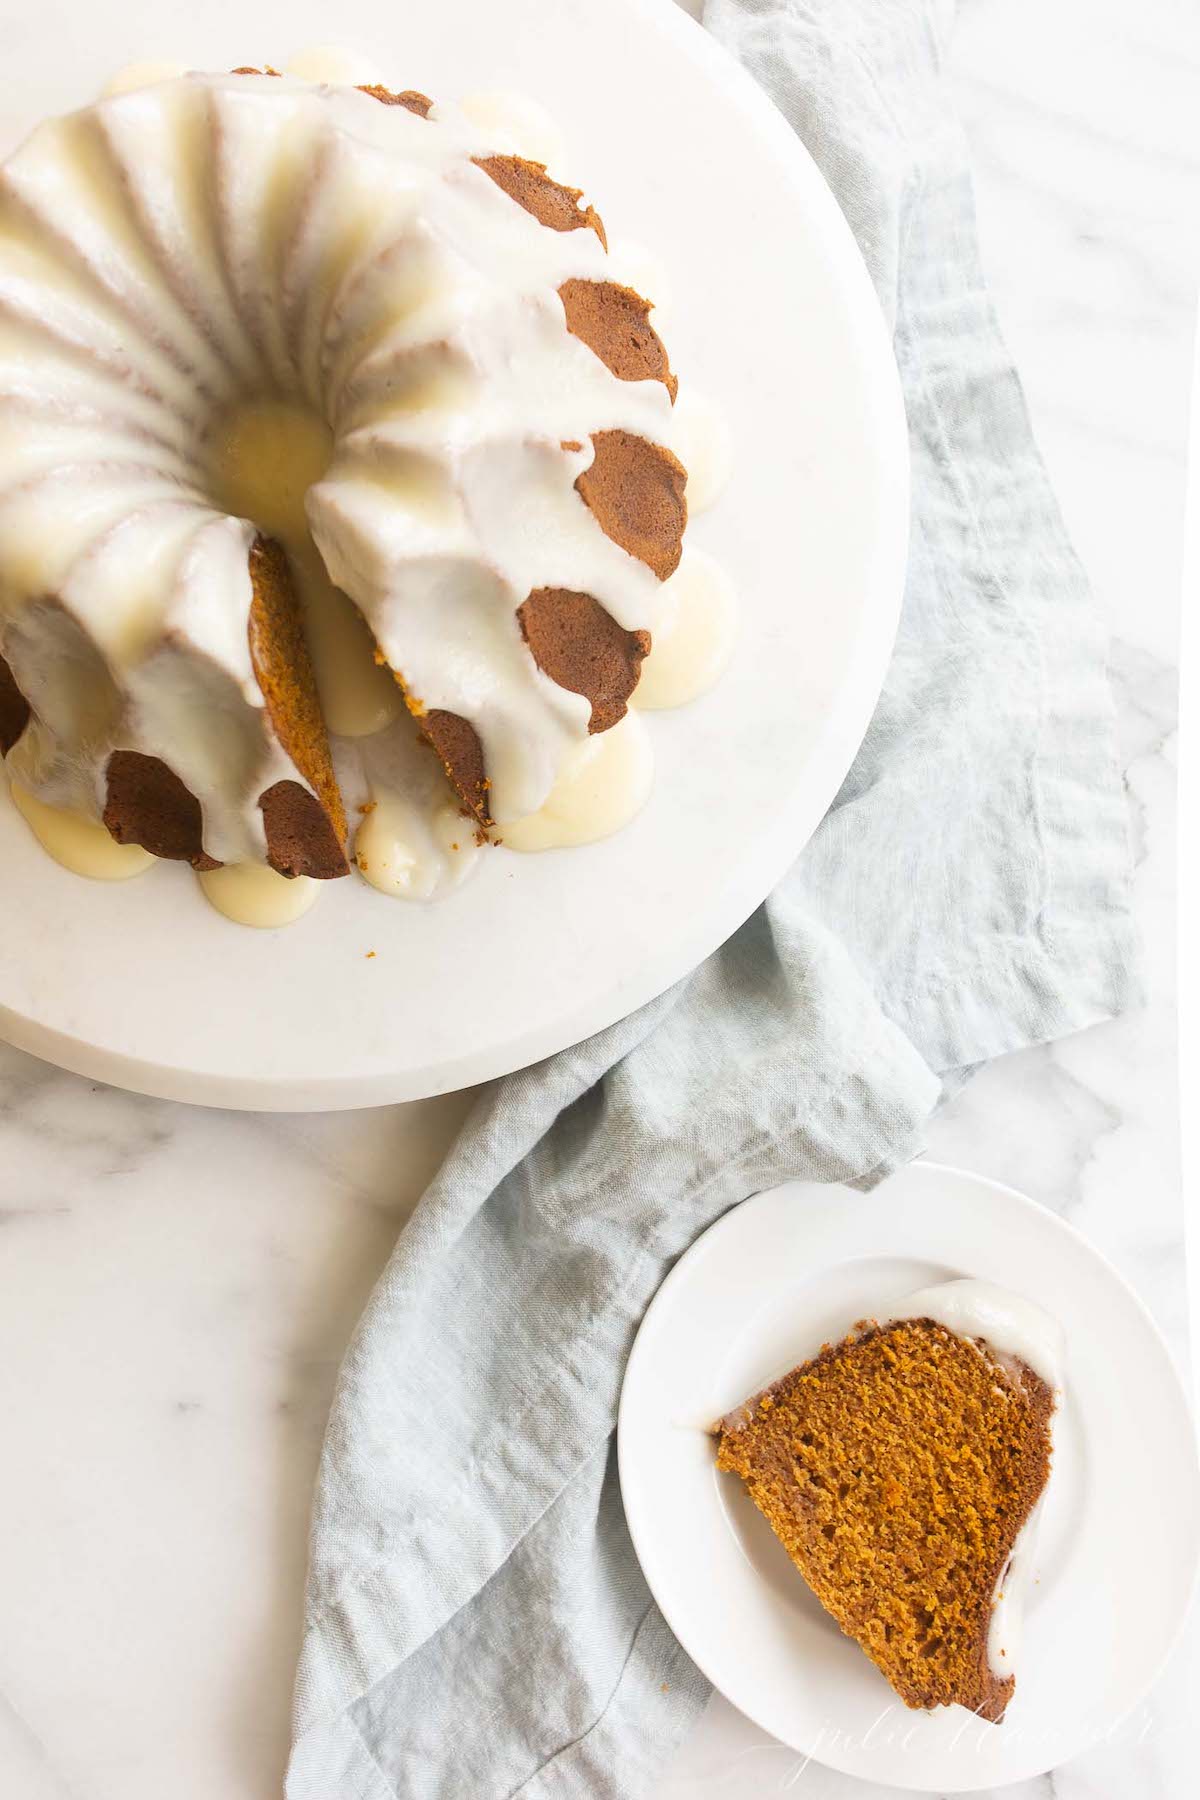 A slice of pumpkin bundt cake, with the full cake in the background.